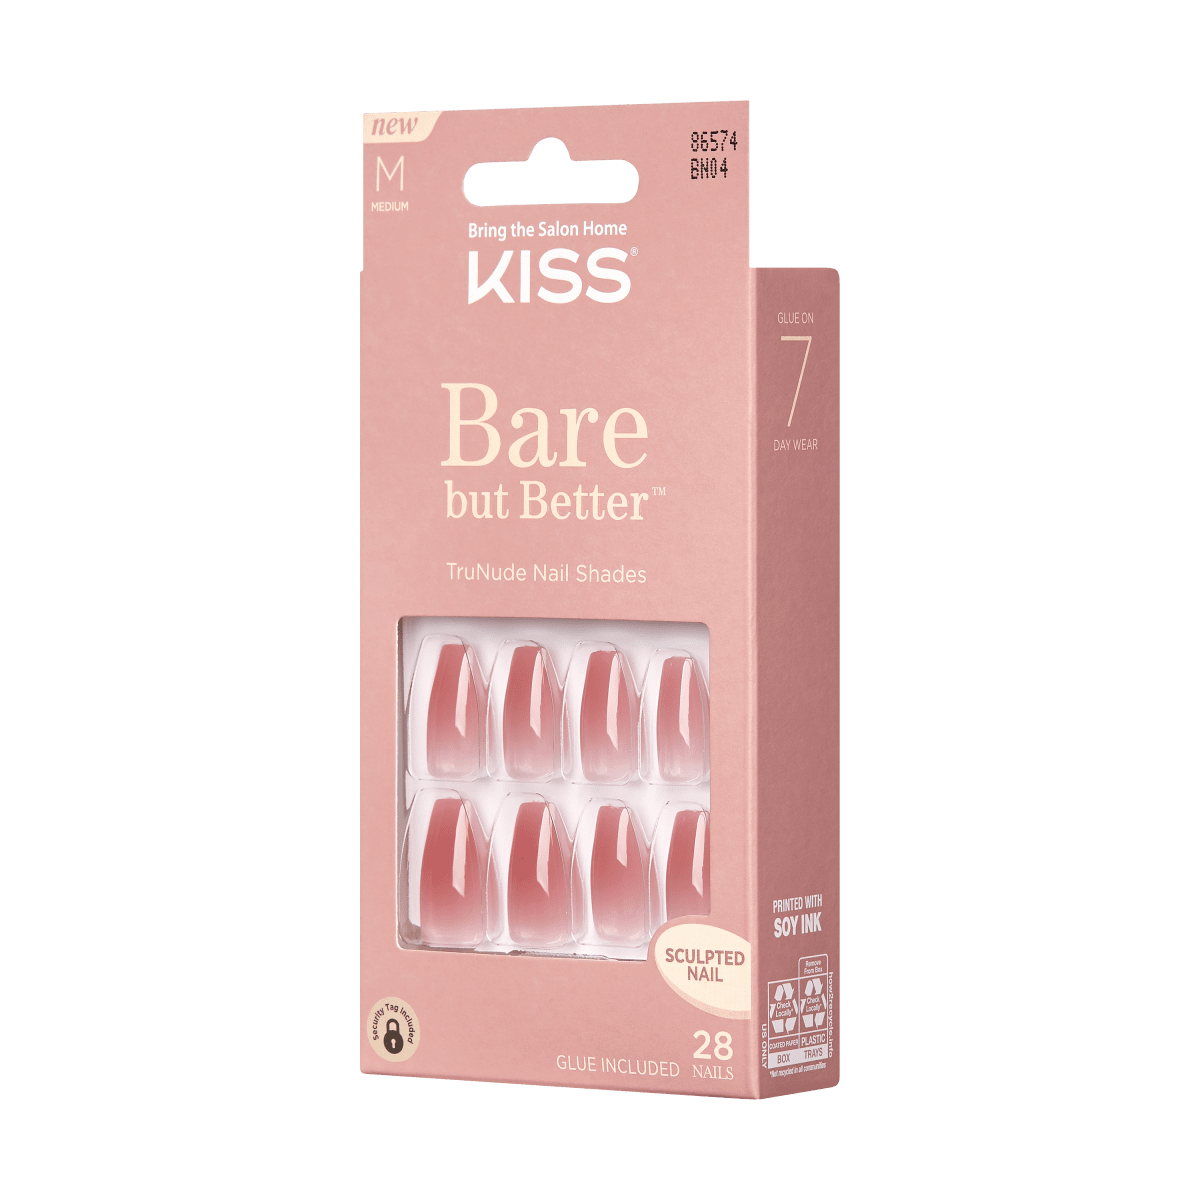 KISS Bare but Better Sculpted Nails - Nude Nude